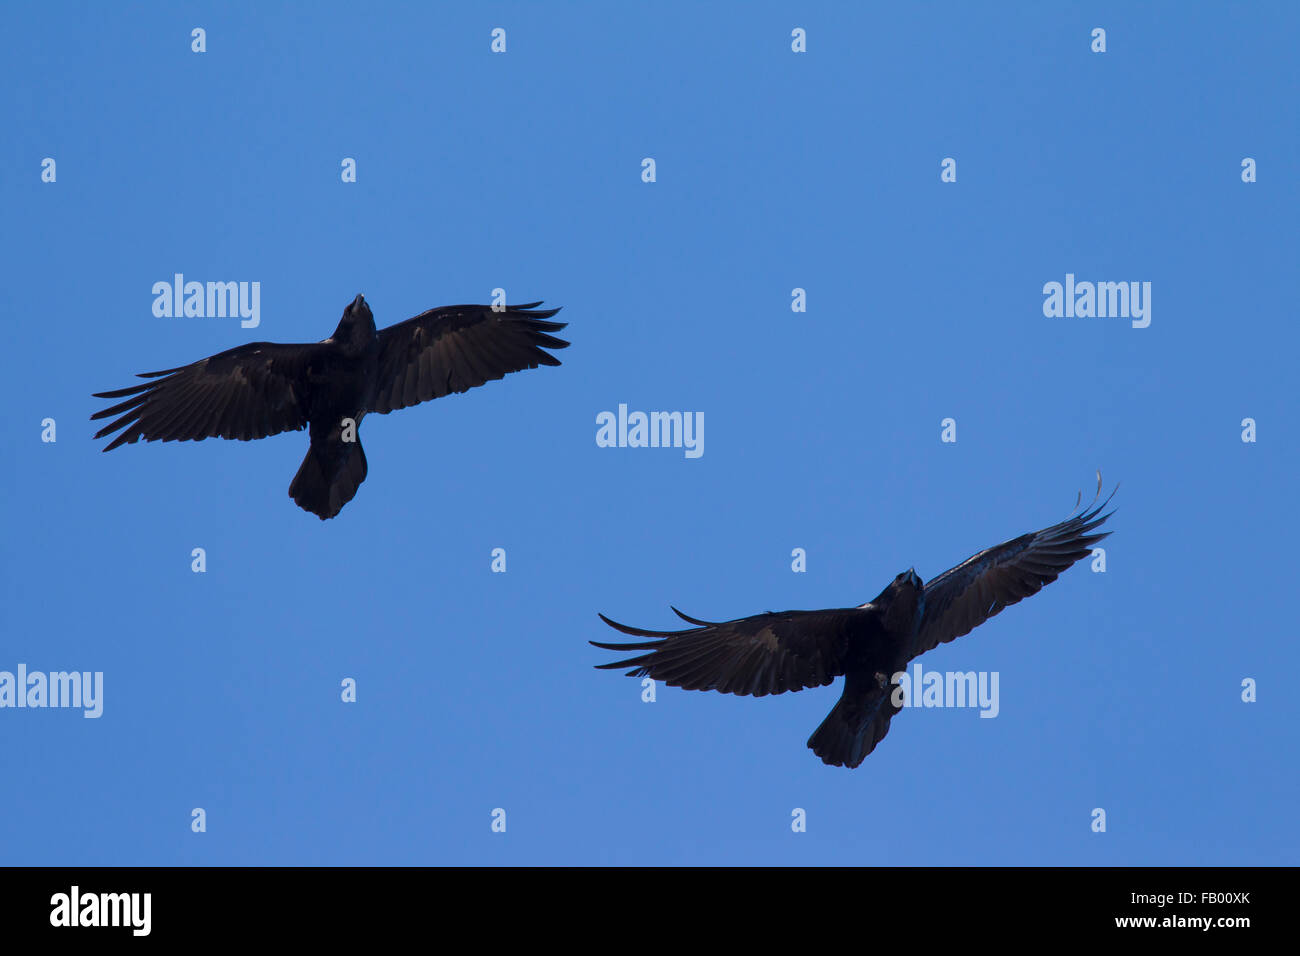 Two common ravens / northern raven (Corvus corax) in flight against blue sky Stock Photo